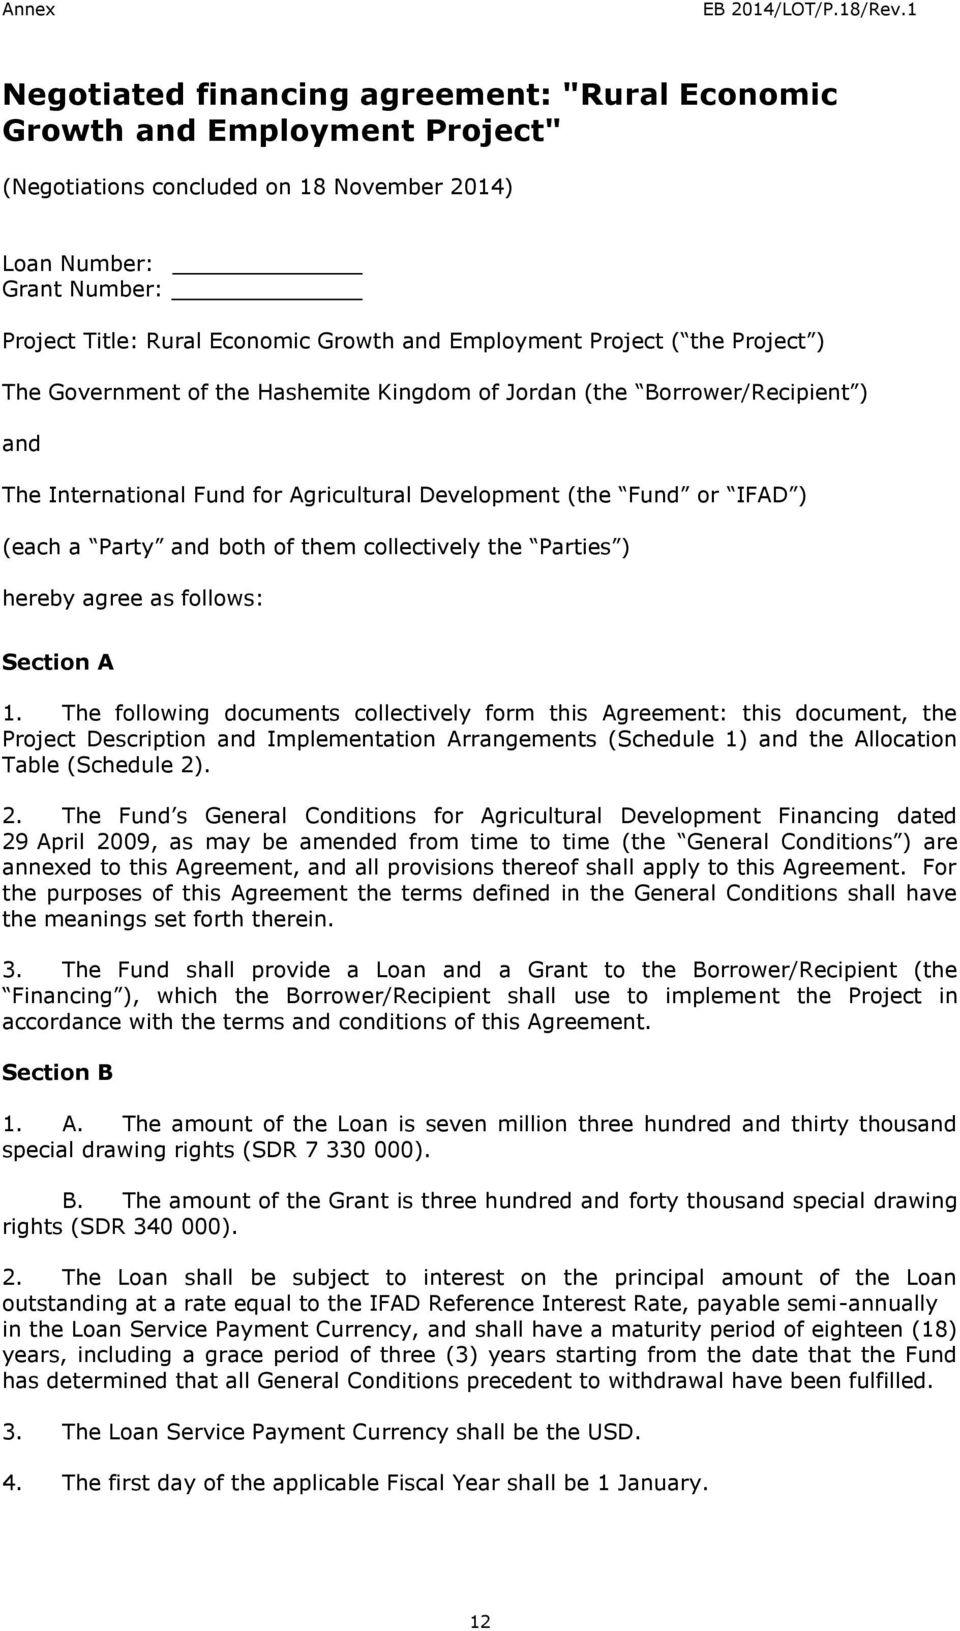 Employment Project ( the Project ) The Government of the Hashemite Kingdom of Jordan (the Borrower/Recipient ) and The International Fund for Agricultural Development (the Fund or IFAD ) (each a